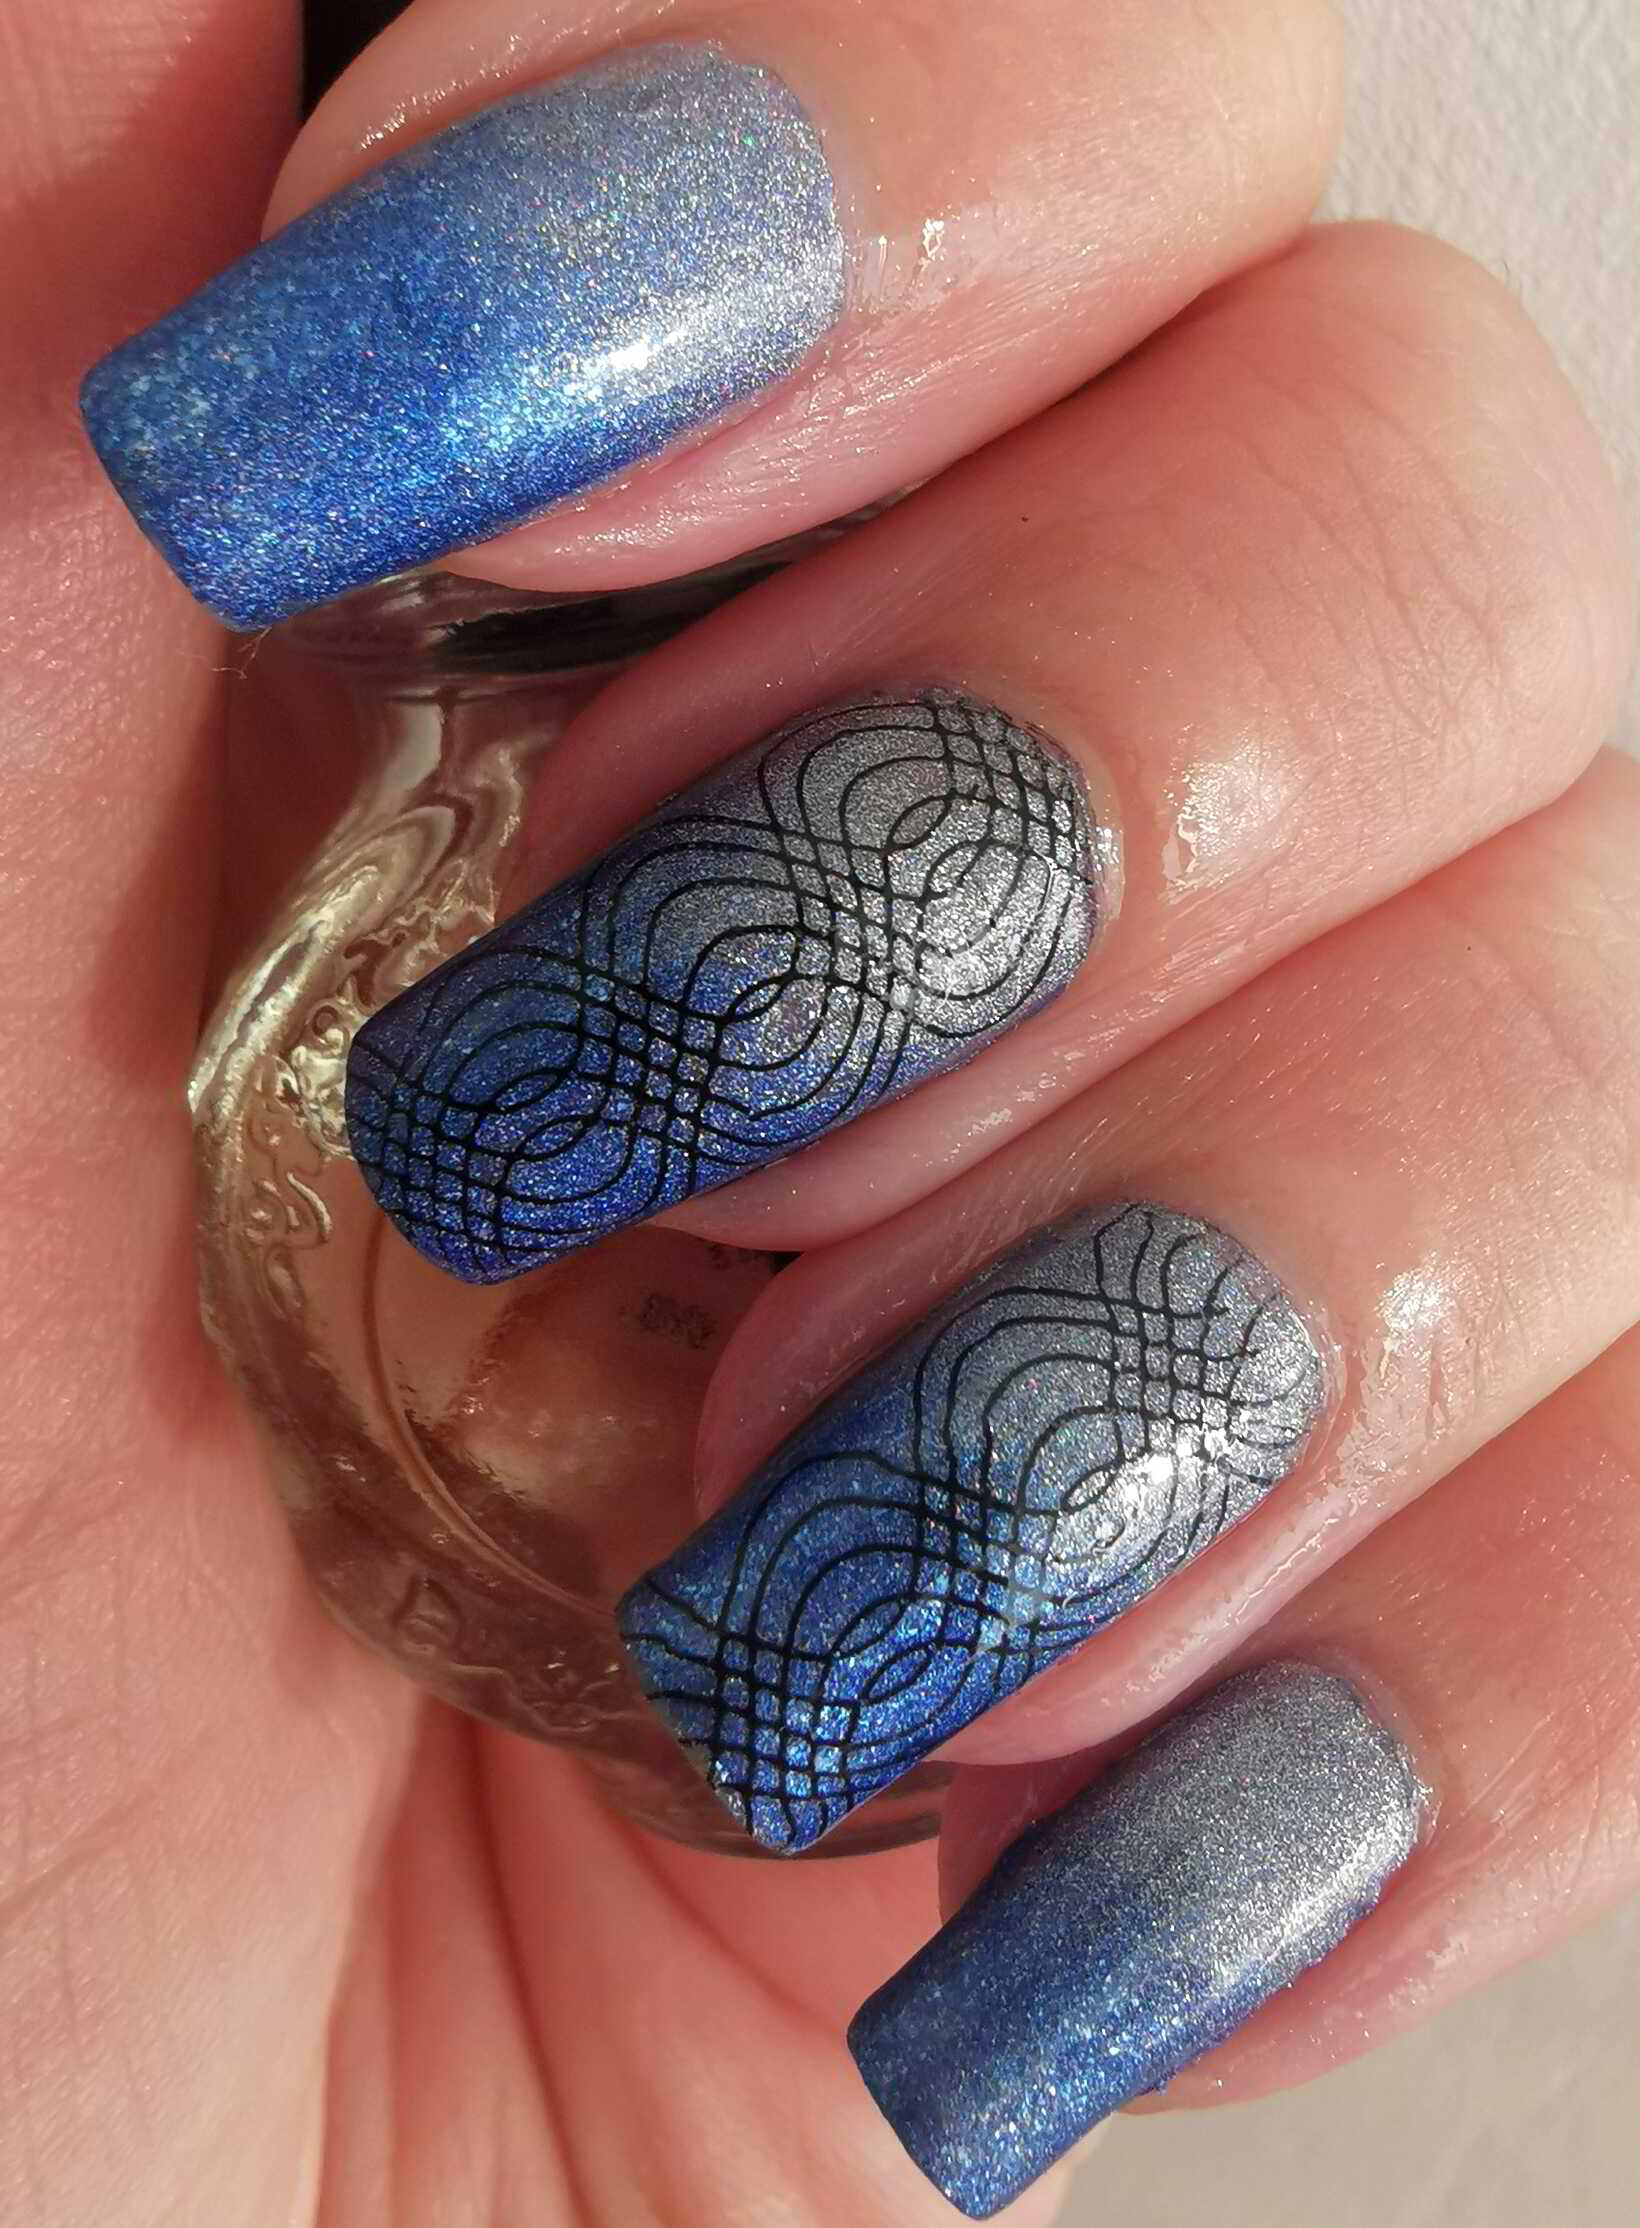 Nail polish manicure of shade Holo Taco Sparkling Water, Color Club Just My Luck,Moyra Spider Gel,Konad Black Stamping Polish